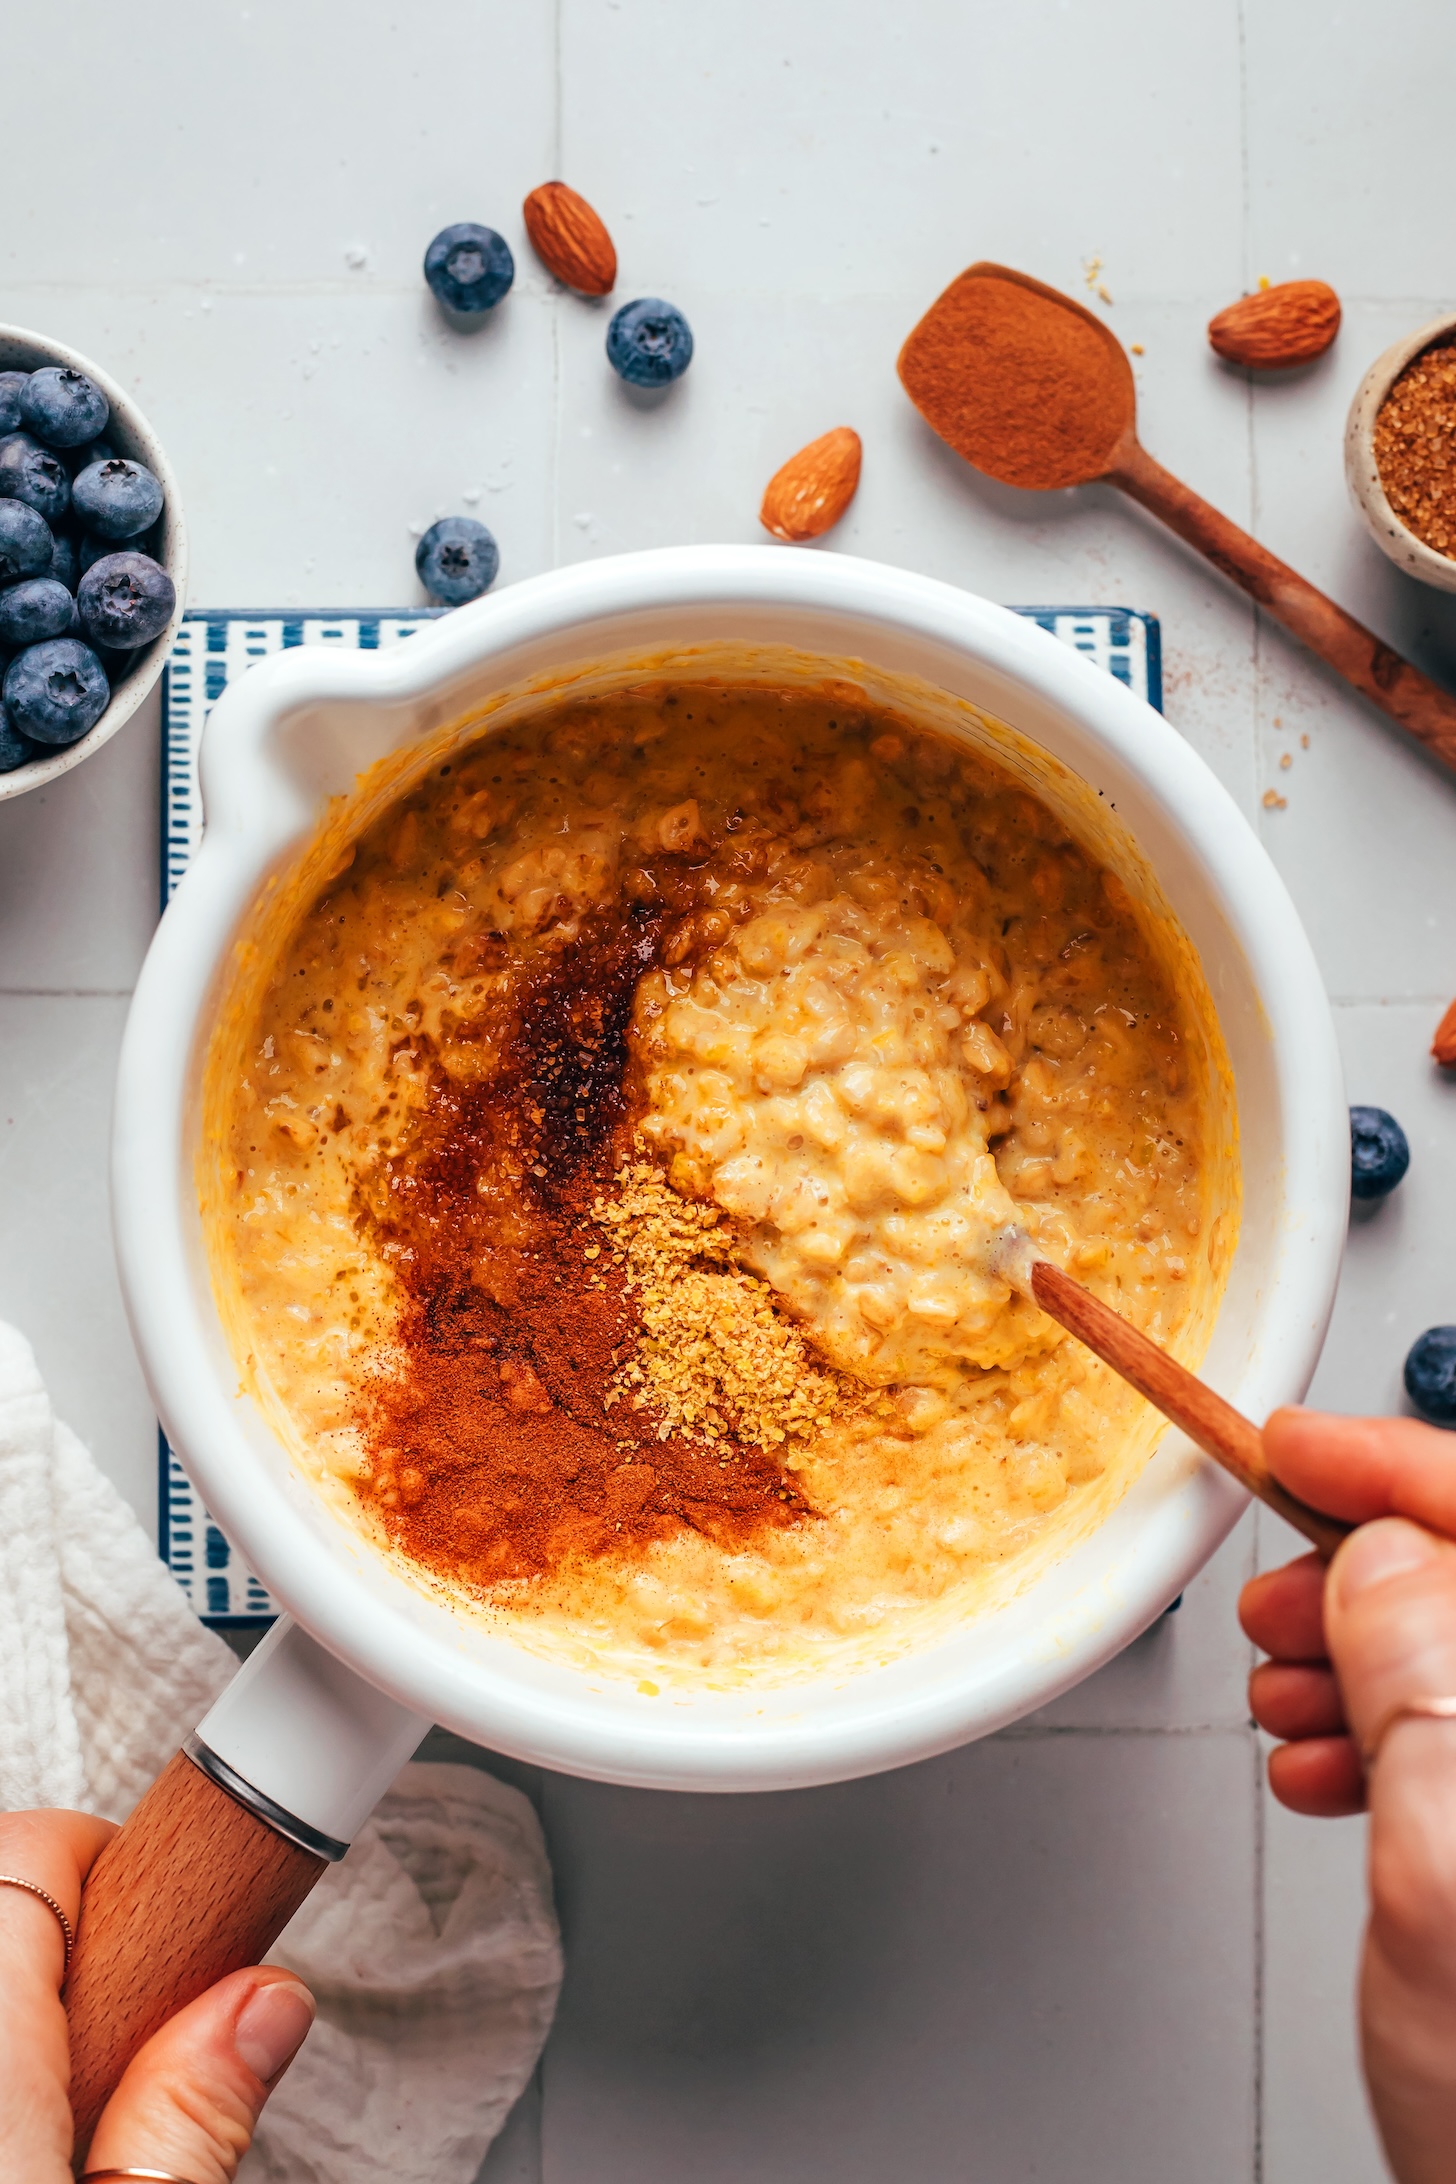 Stirring creamy pumpkin oats with spices and brown sugar in a small white saucepan